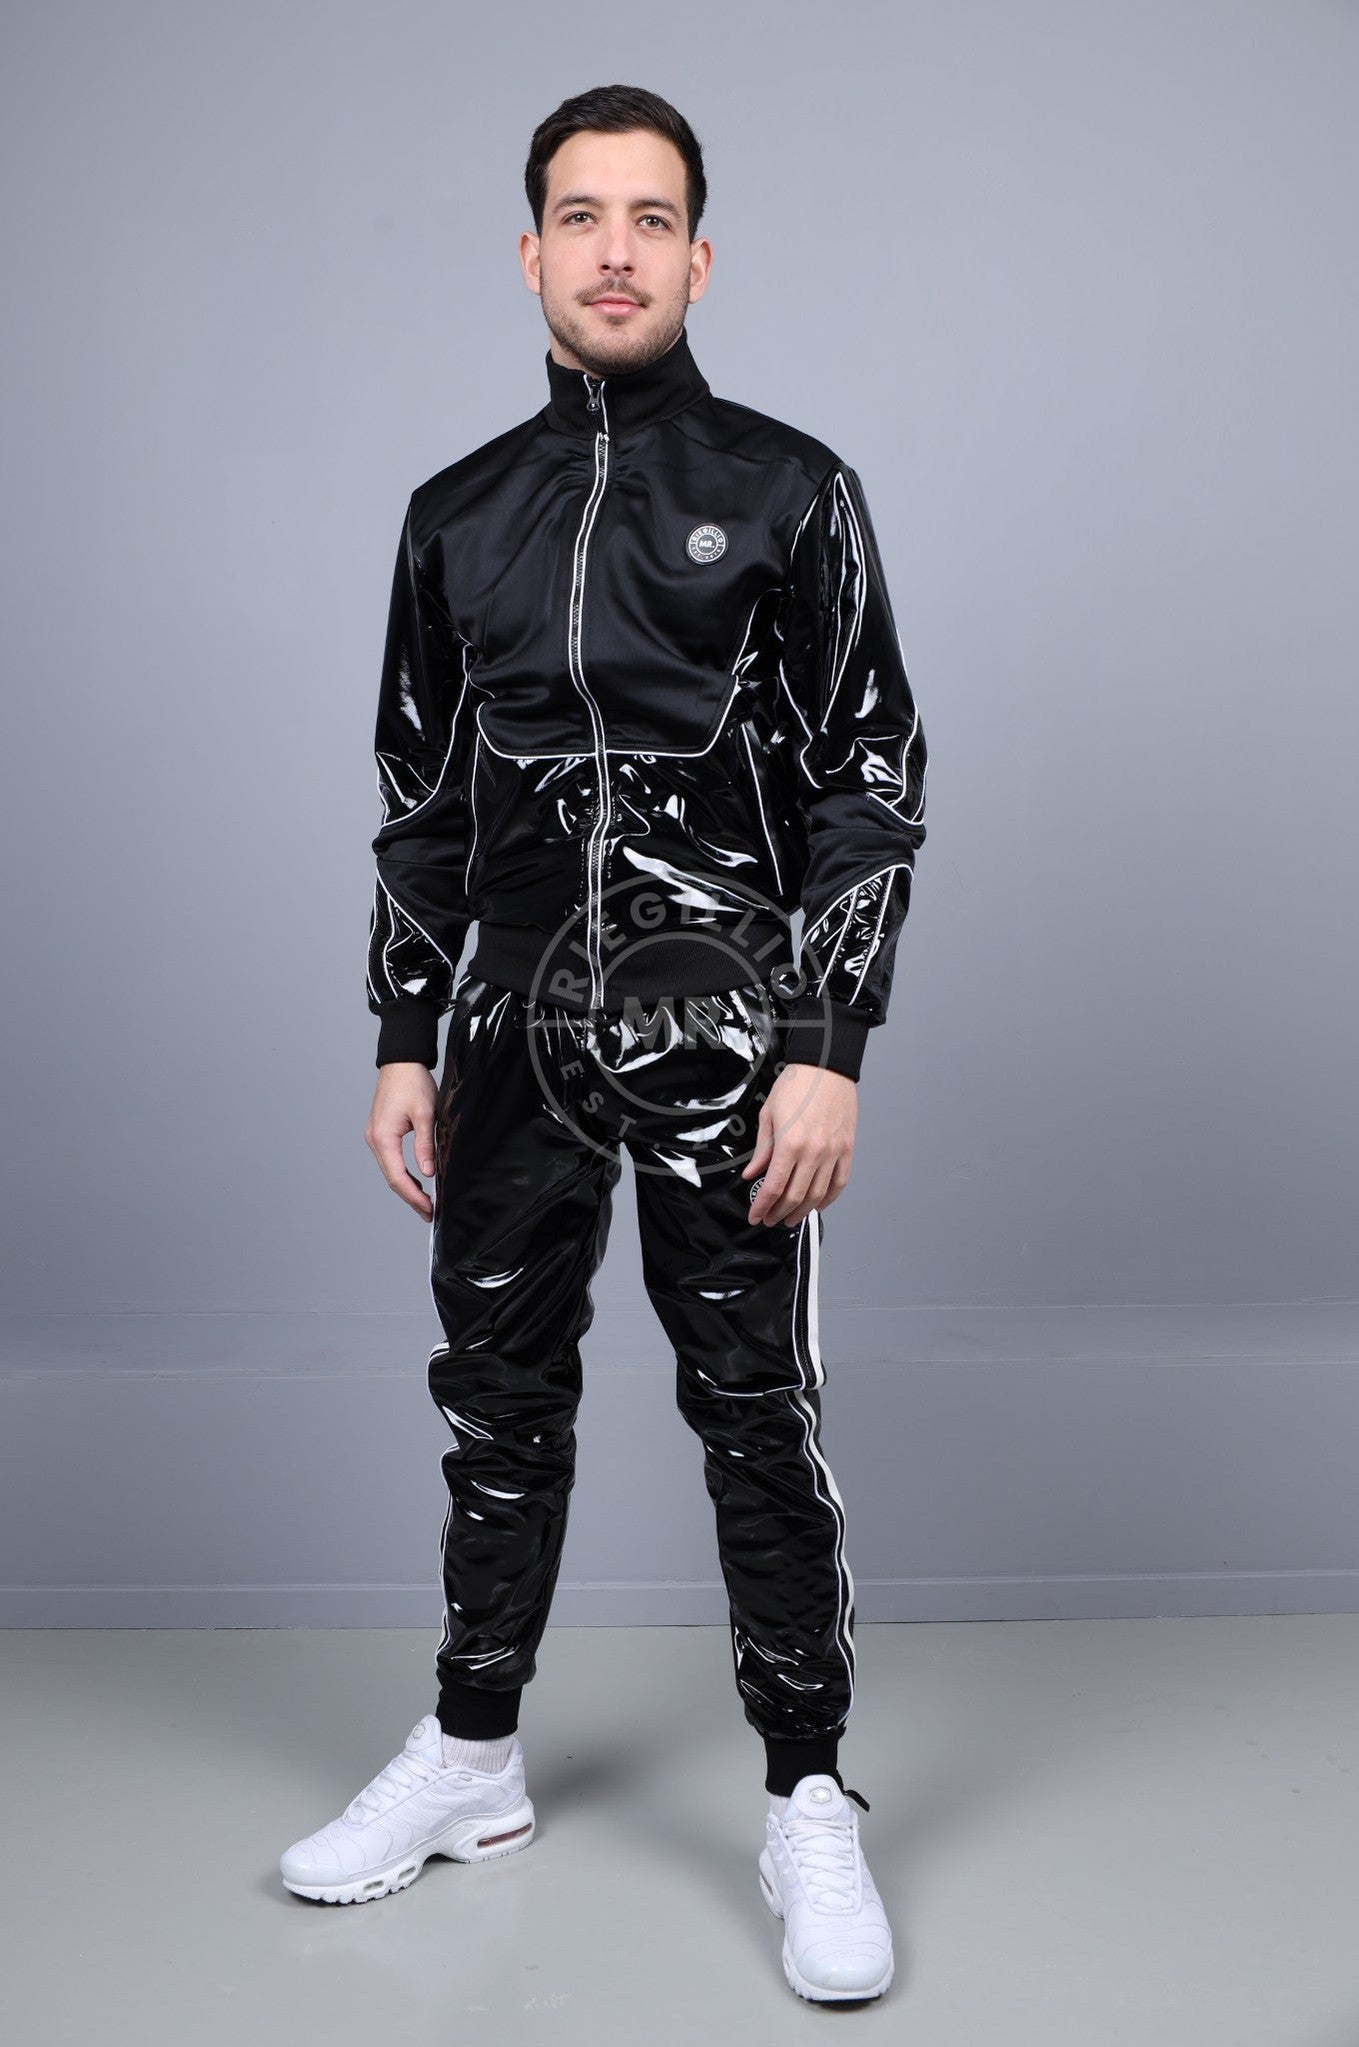 PVC 24 Tracksuit Jacket - Black with White Piping at MR. Riegillio